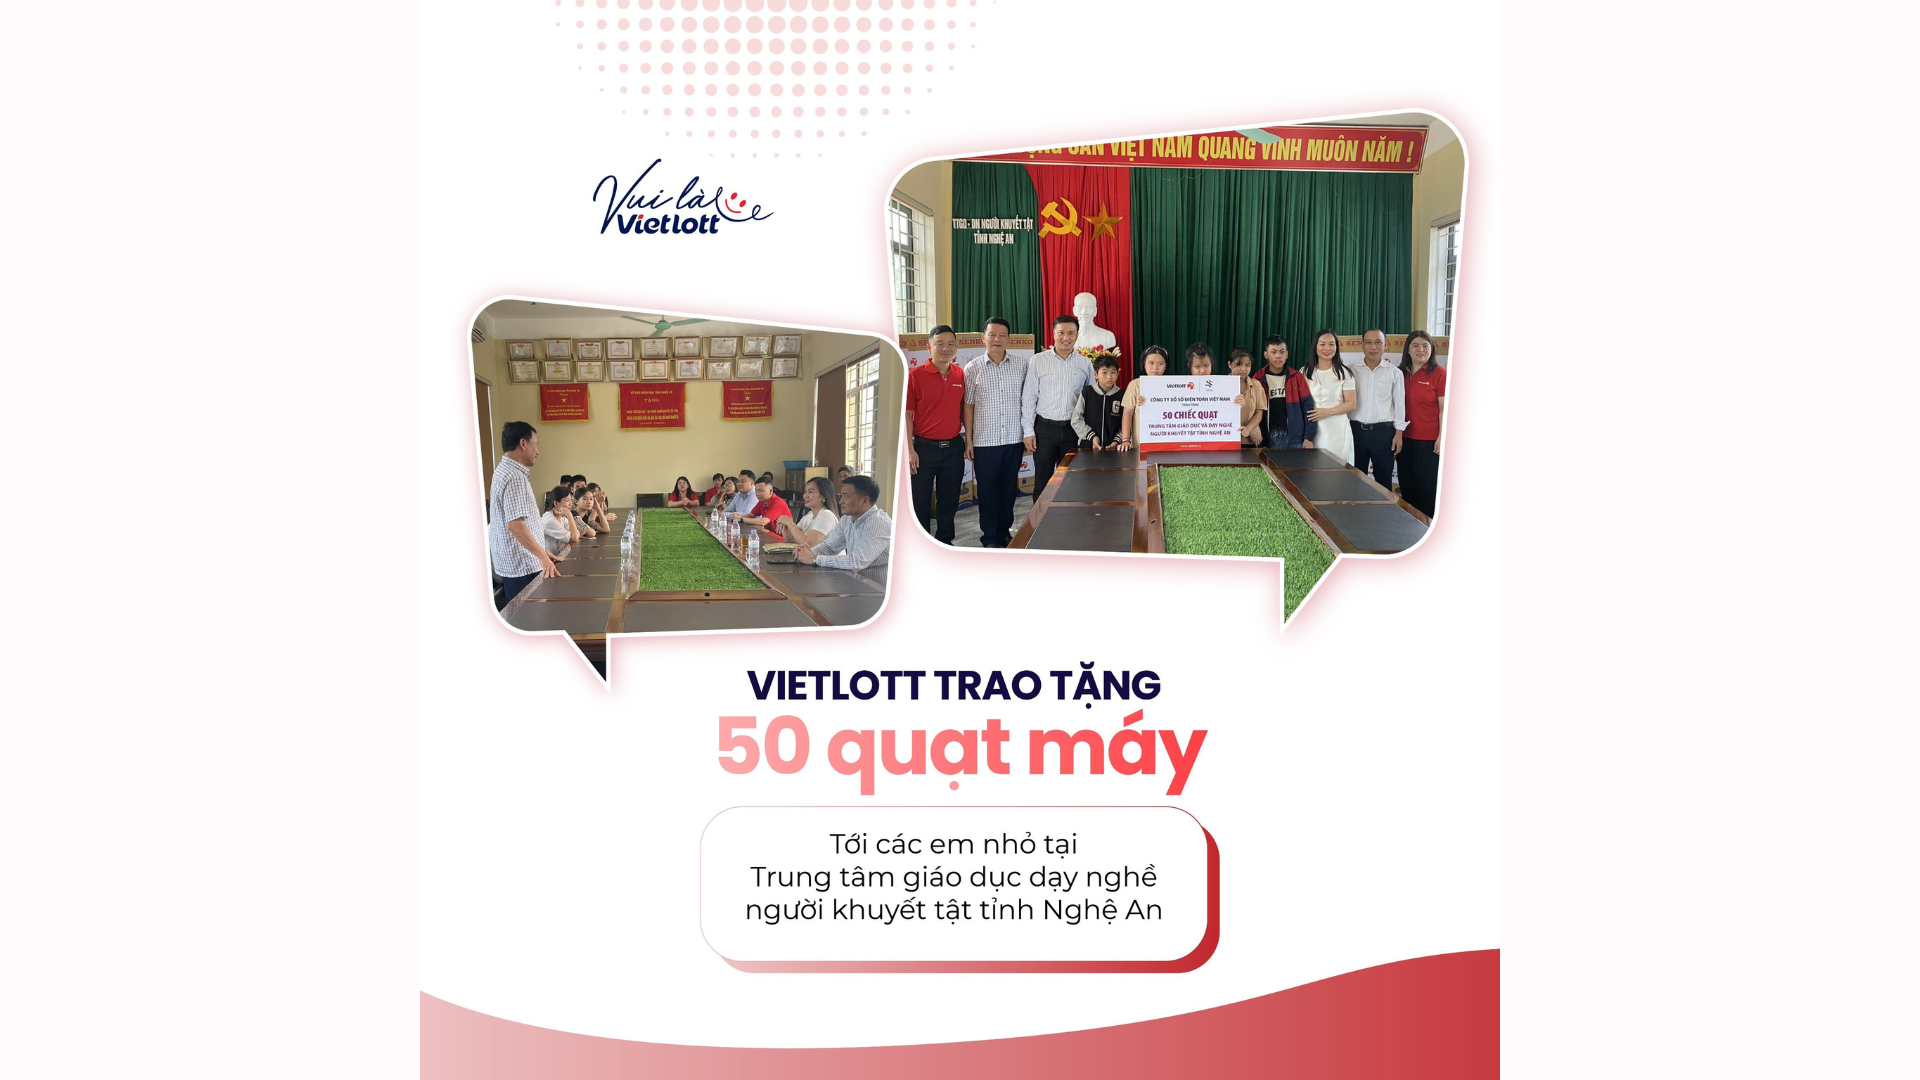 VIETLOTT DONATES 50 FANS TO THE CENTER FOR VOCATIONAL TRAINING FOR PEOPLE WITH DISABILITIES IN NGHE AN PROVINCE!